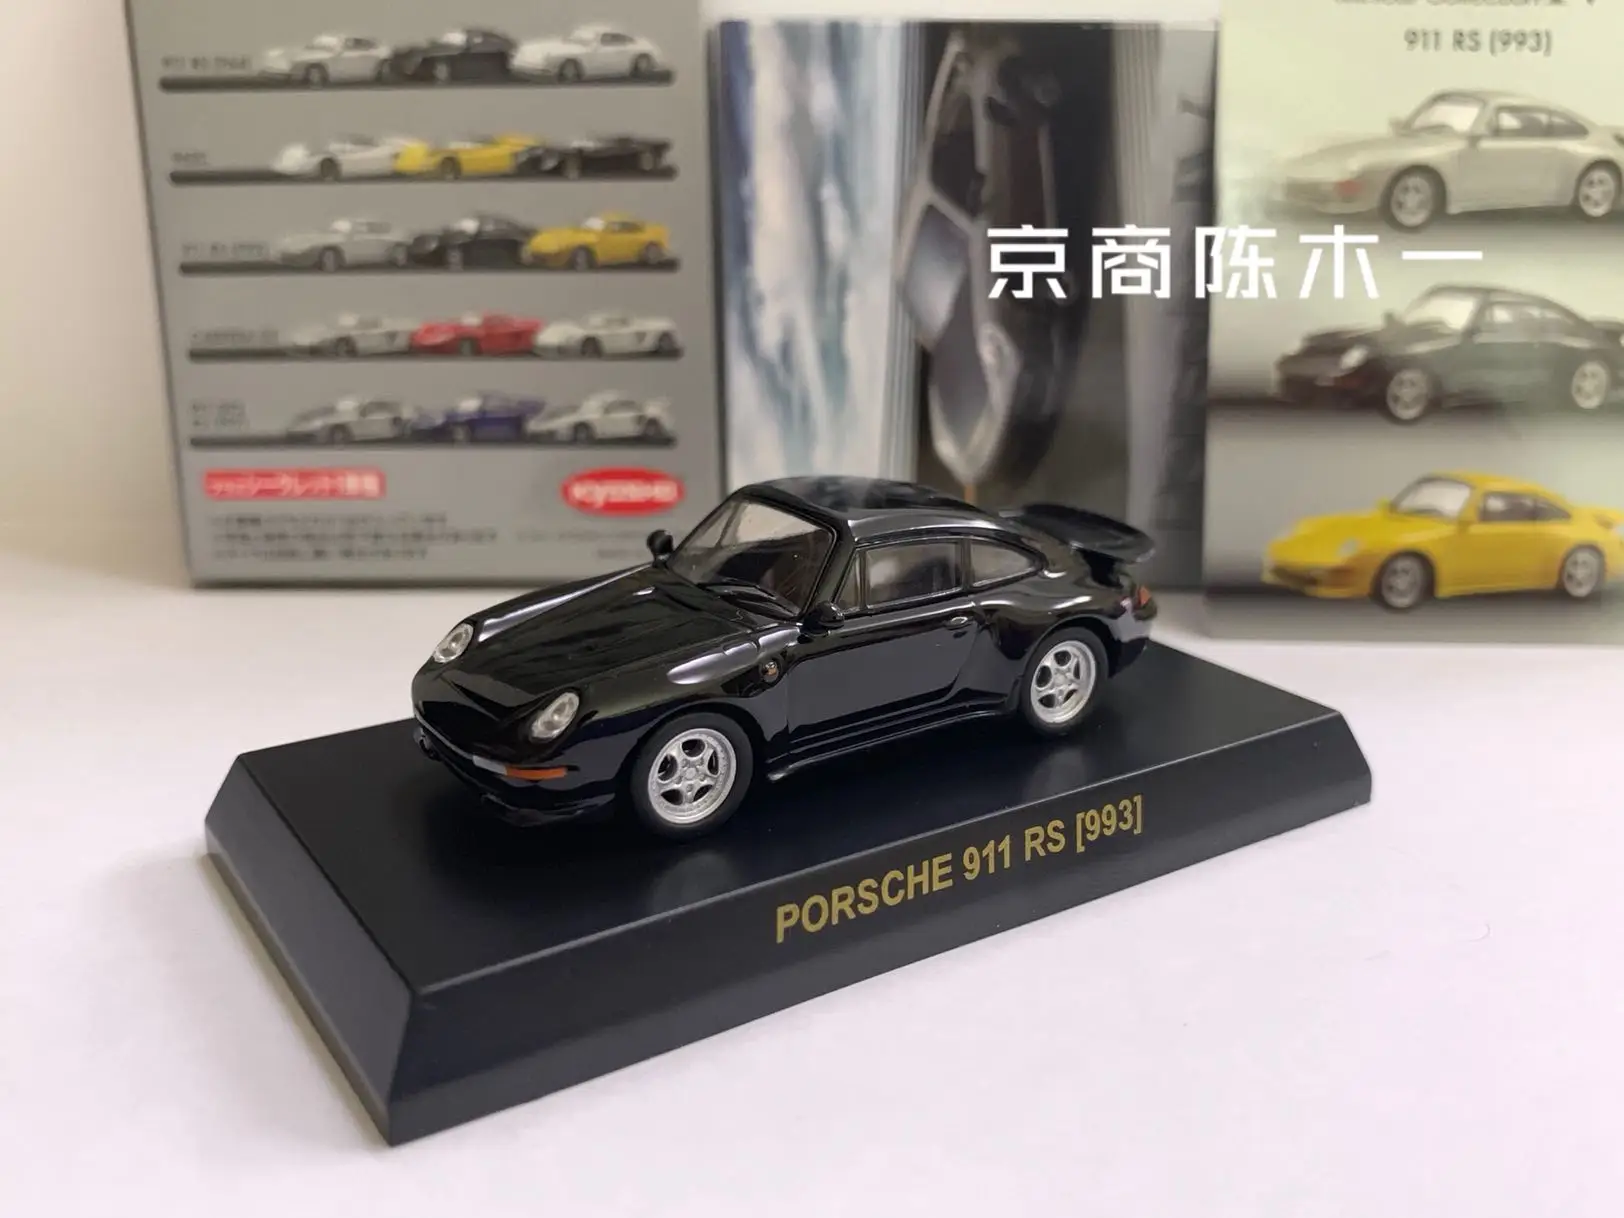 

KYOSHO 1/64 PORSCHE 911 RS 933 Collect die casting alloy F1 RACING trolley model